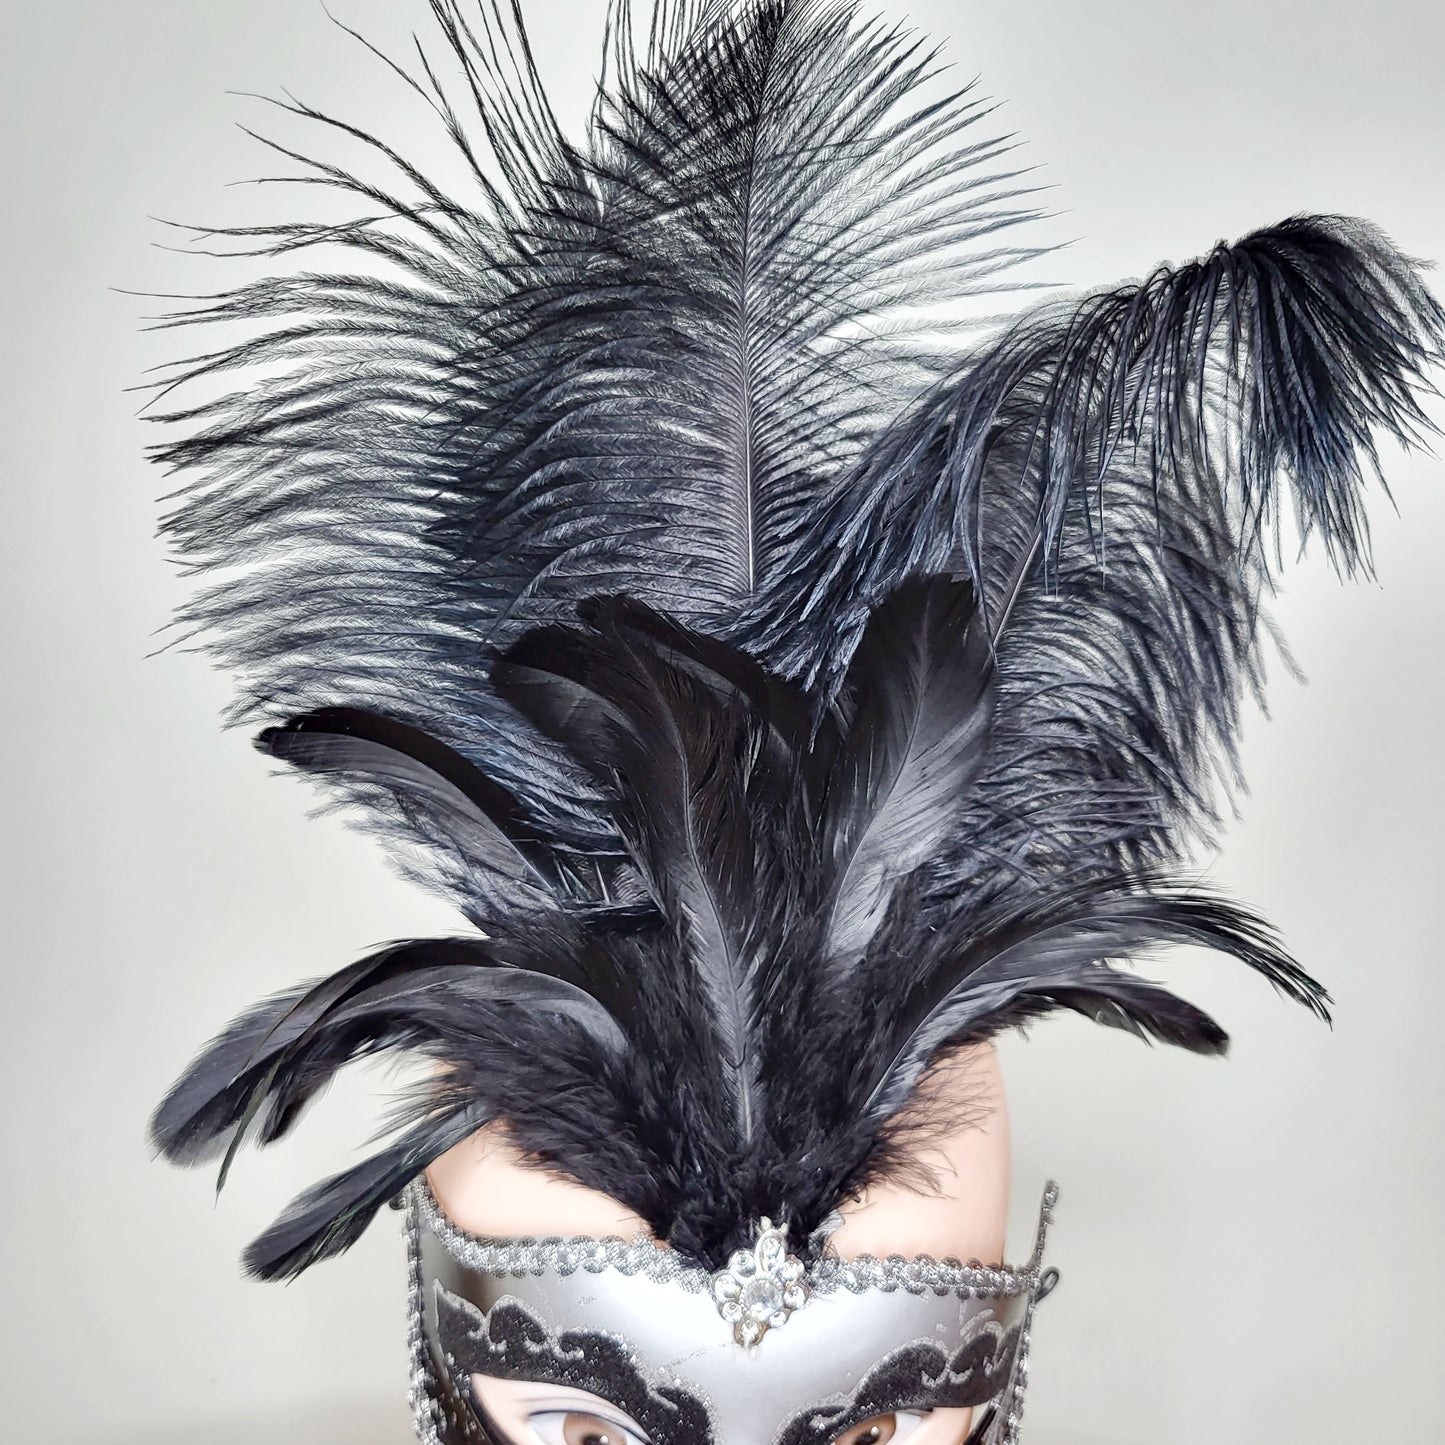 REWNDZ - Black and silver masquerade mask with feathers, minor flaws